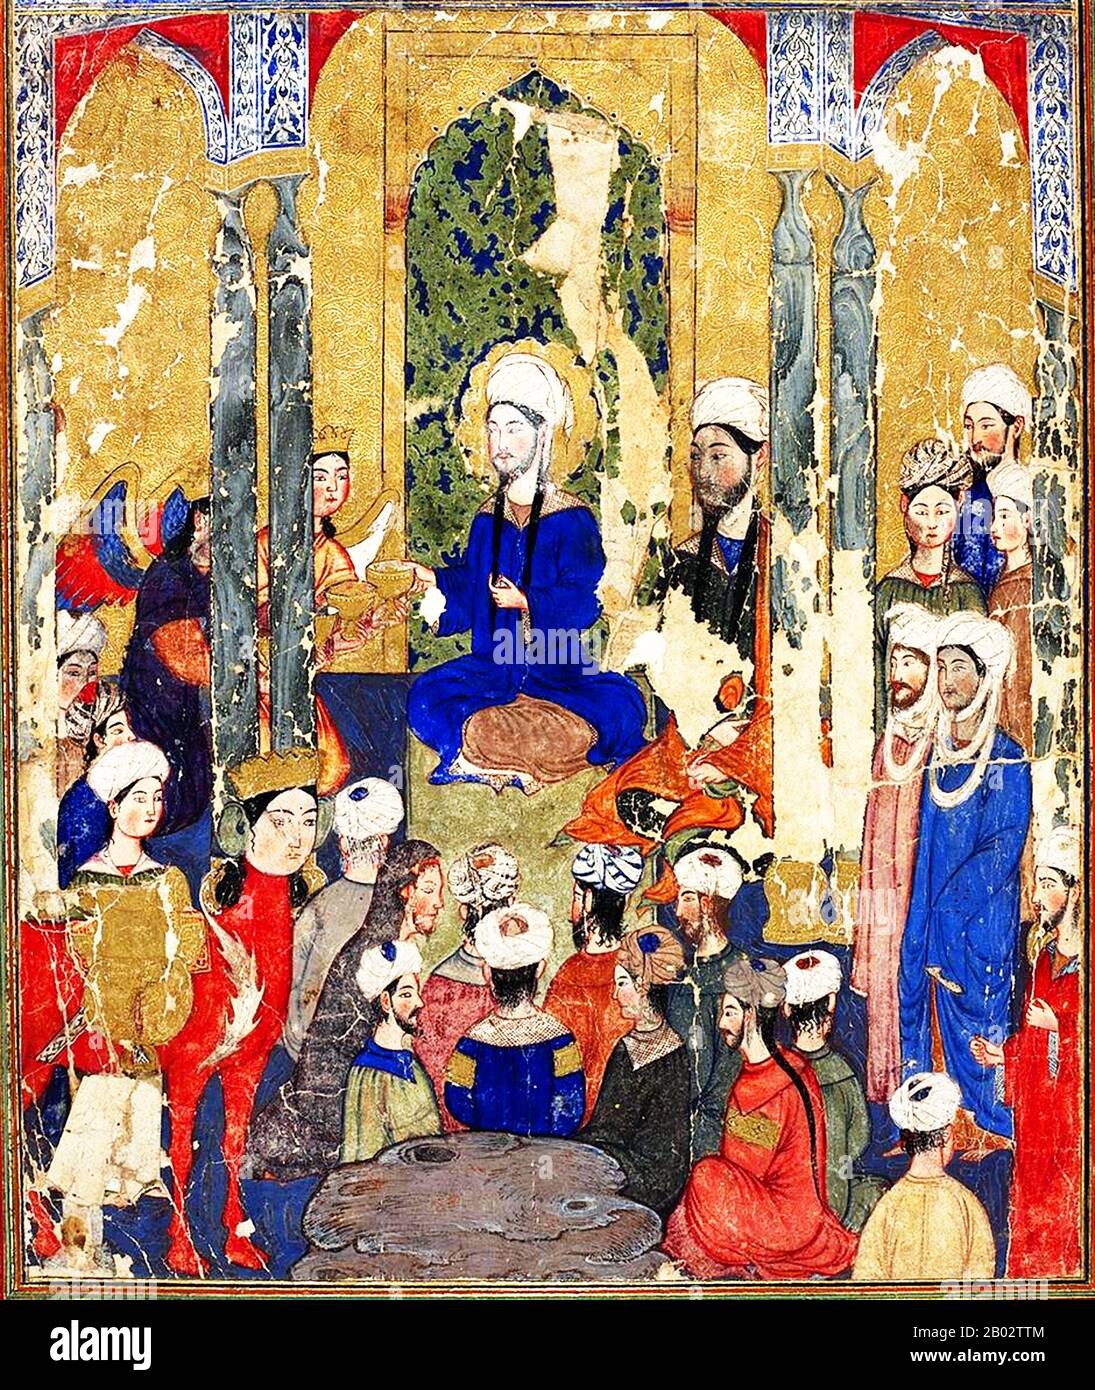 The Miraj forms part of the Night Journey that the prophet of Islam, Muhammad took during a single night around the year 621 CE.  In the journey, Muhammad travels on the steed Buraq to 'the farthest mosque' where he leads other prophets in prayer. He then ascends to heaven where he speaks to God, who gives Muhammad instructions to take back to the faithful regarding the details of prayer.  Representations of the Prophet Muhammad are controversial, and generally forbidden in Sunni Islam (especially Hanafiyya, Wahabi, Salafiyya). Shia Islam and some other branches of Sunni Islam (Hanbali, Maliki Stock Photo